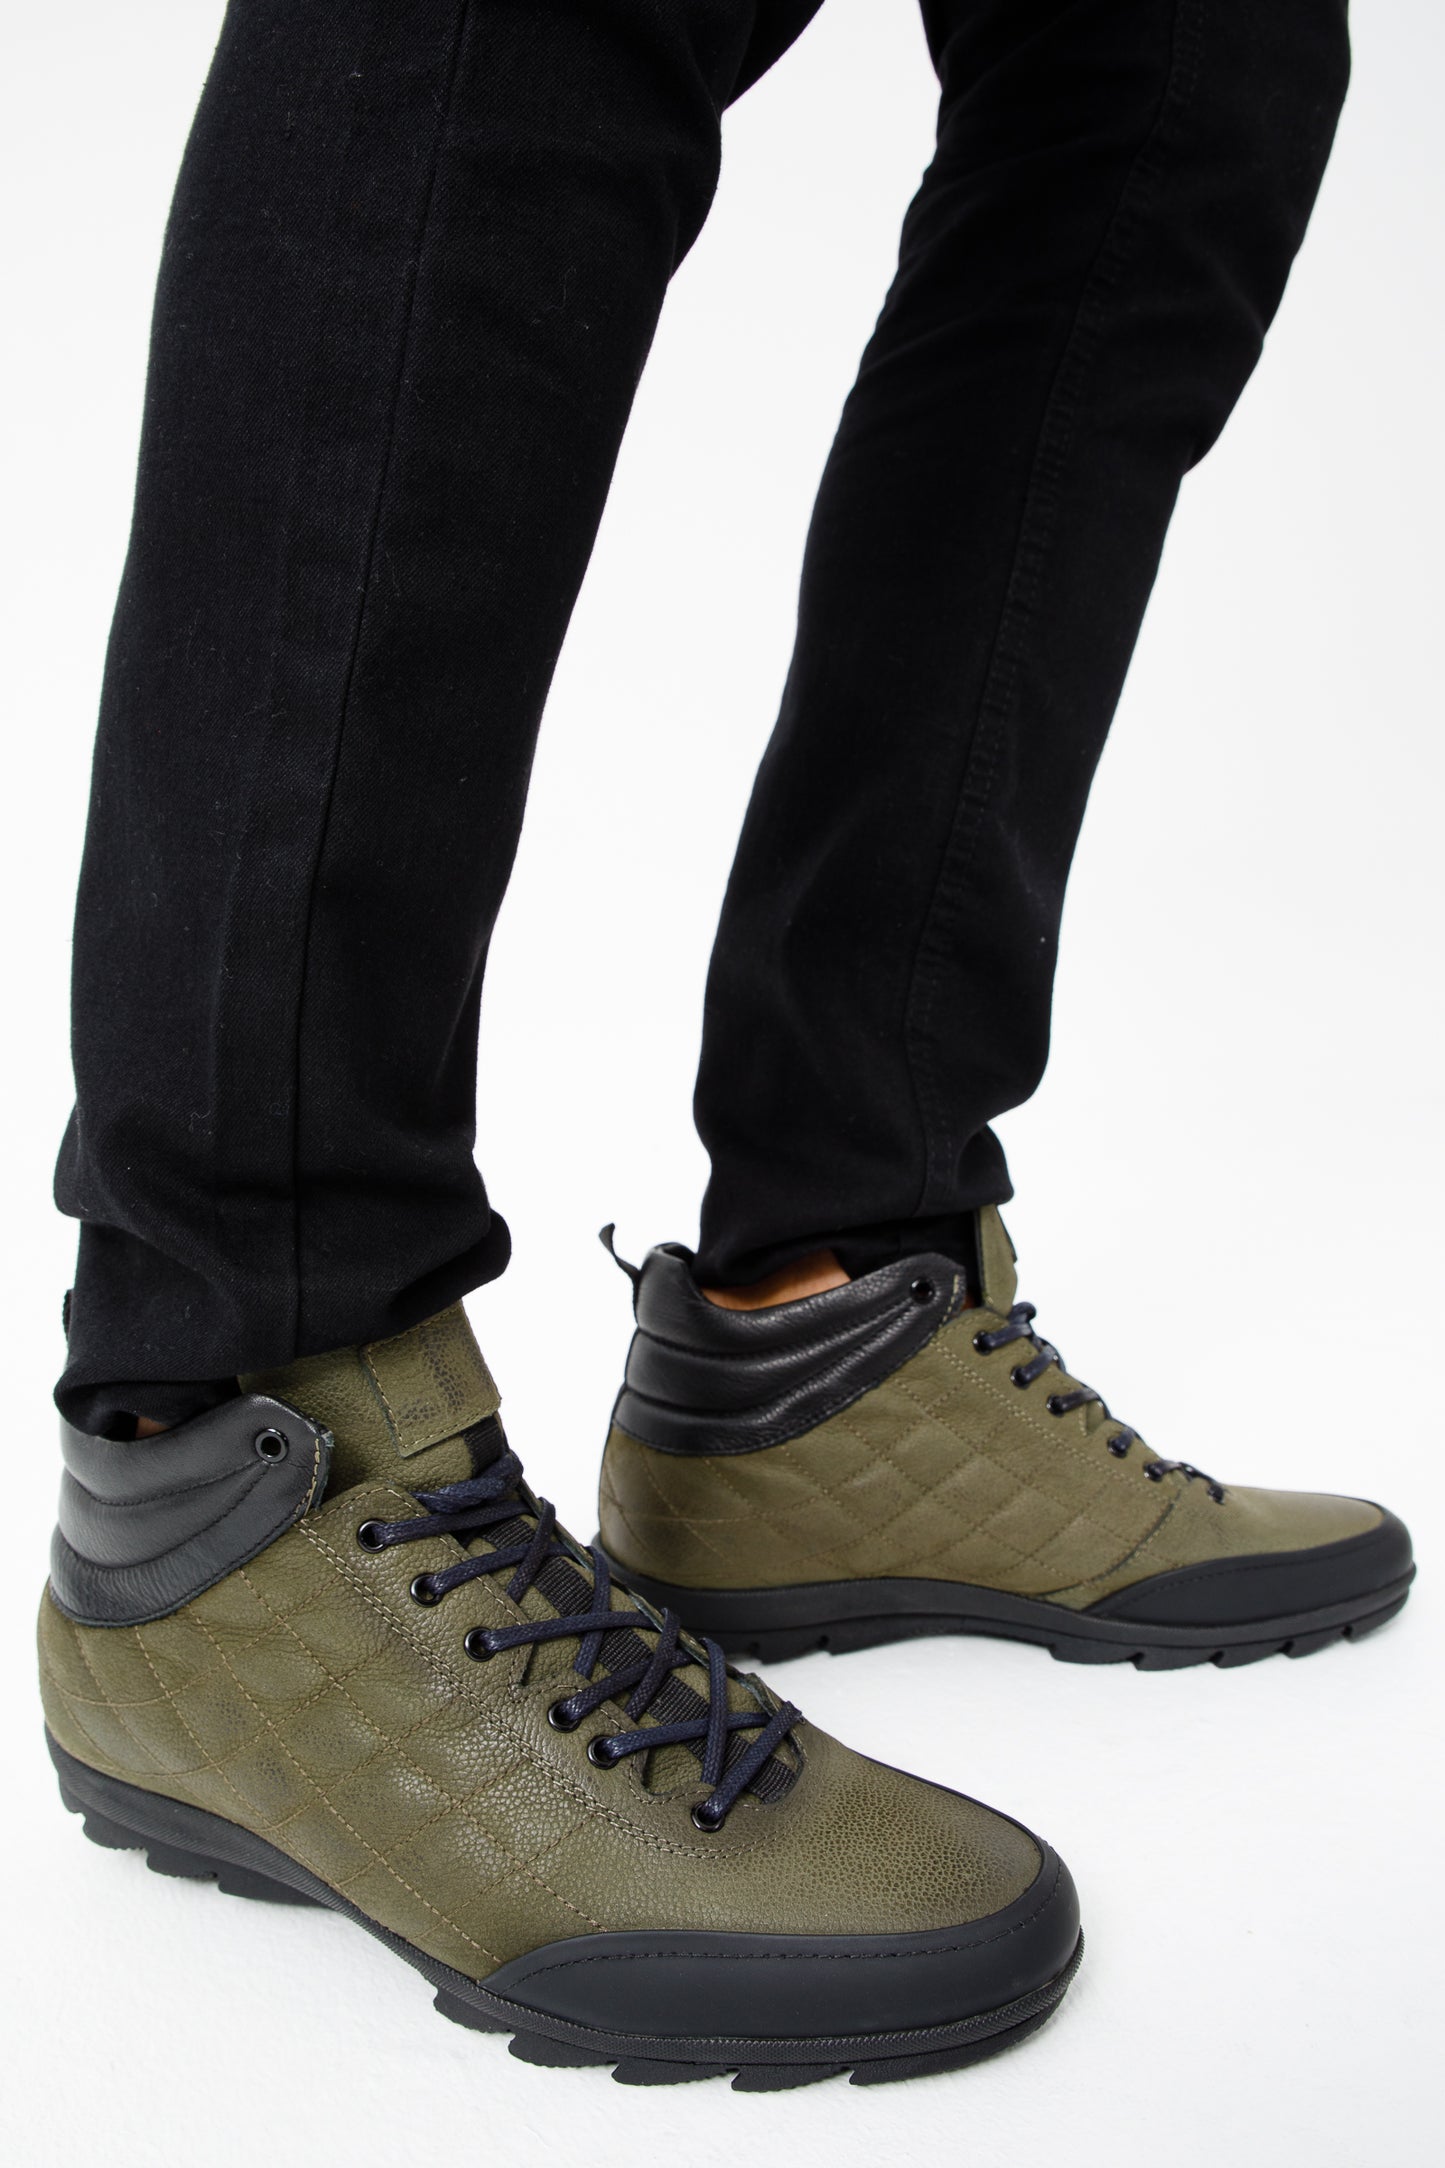 The Riga Green Suede Leather Casual Lace-Up Men Boot with a Zipper